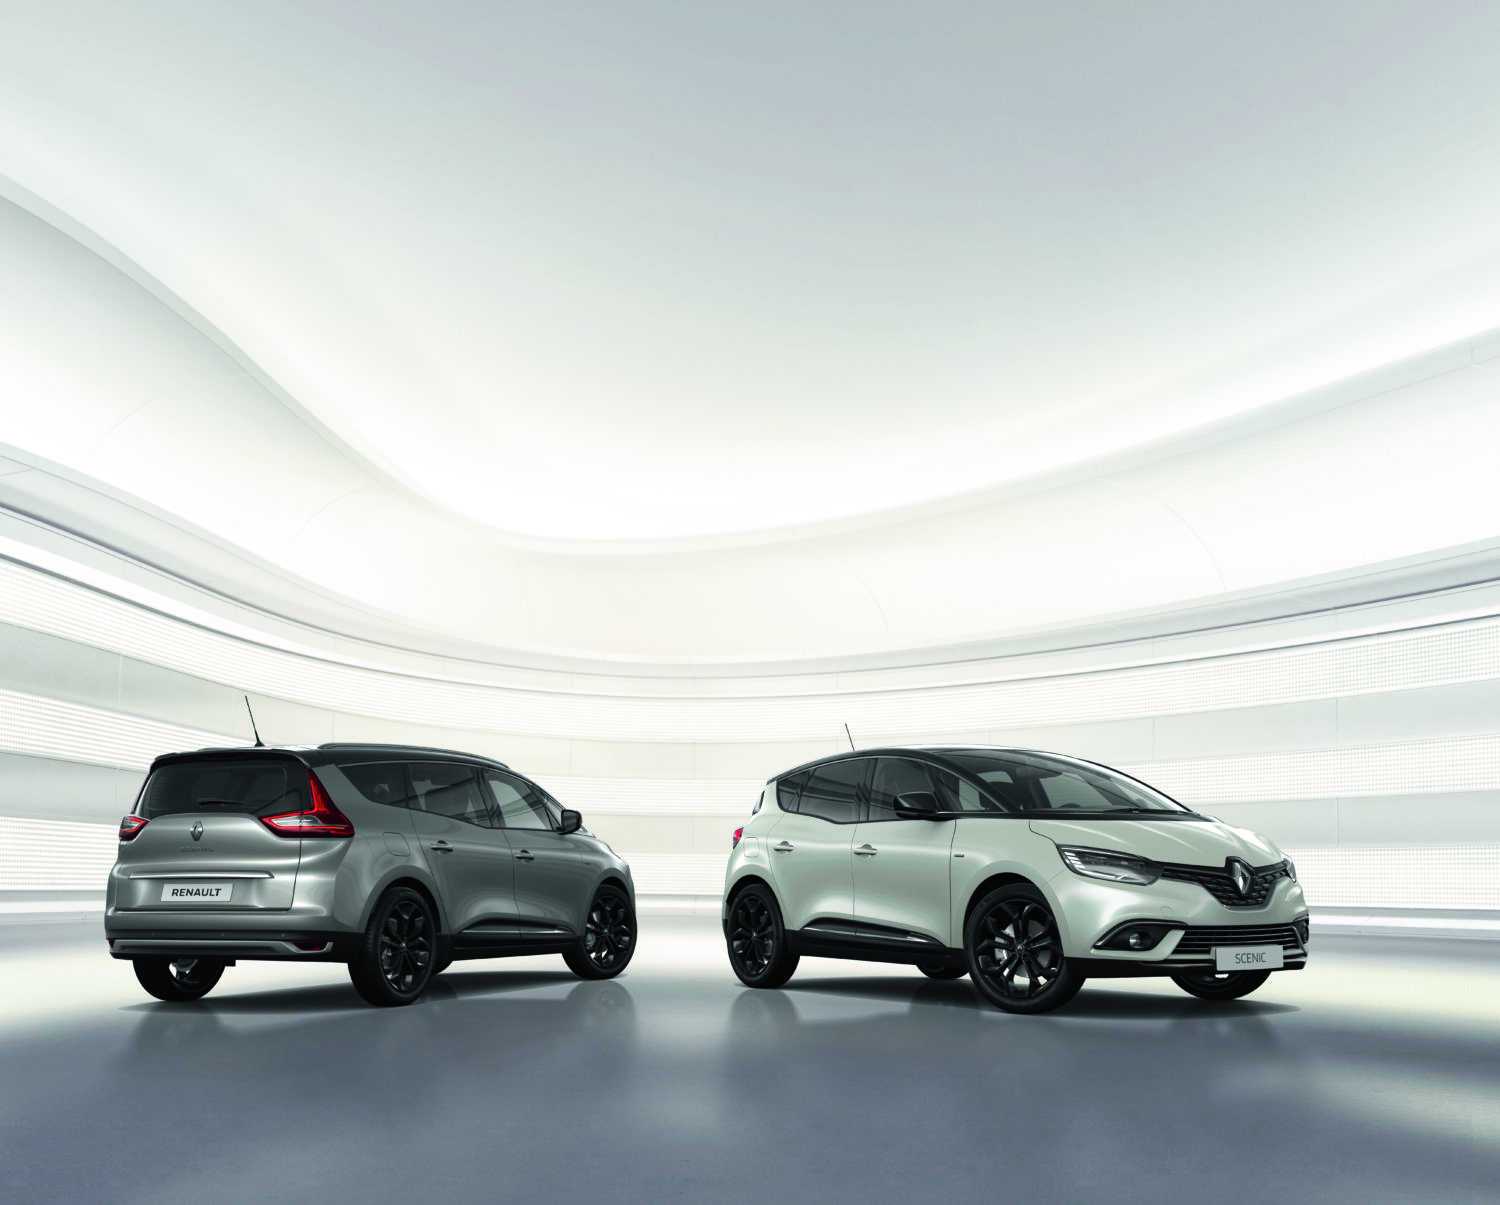 2019 - Renault SCENIC and Renault GRAND SCENIC Black Edition Limited Edition